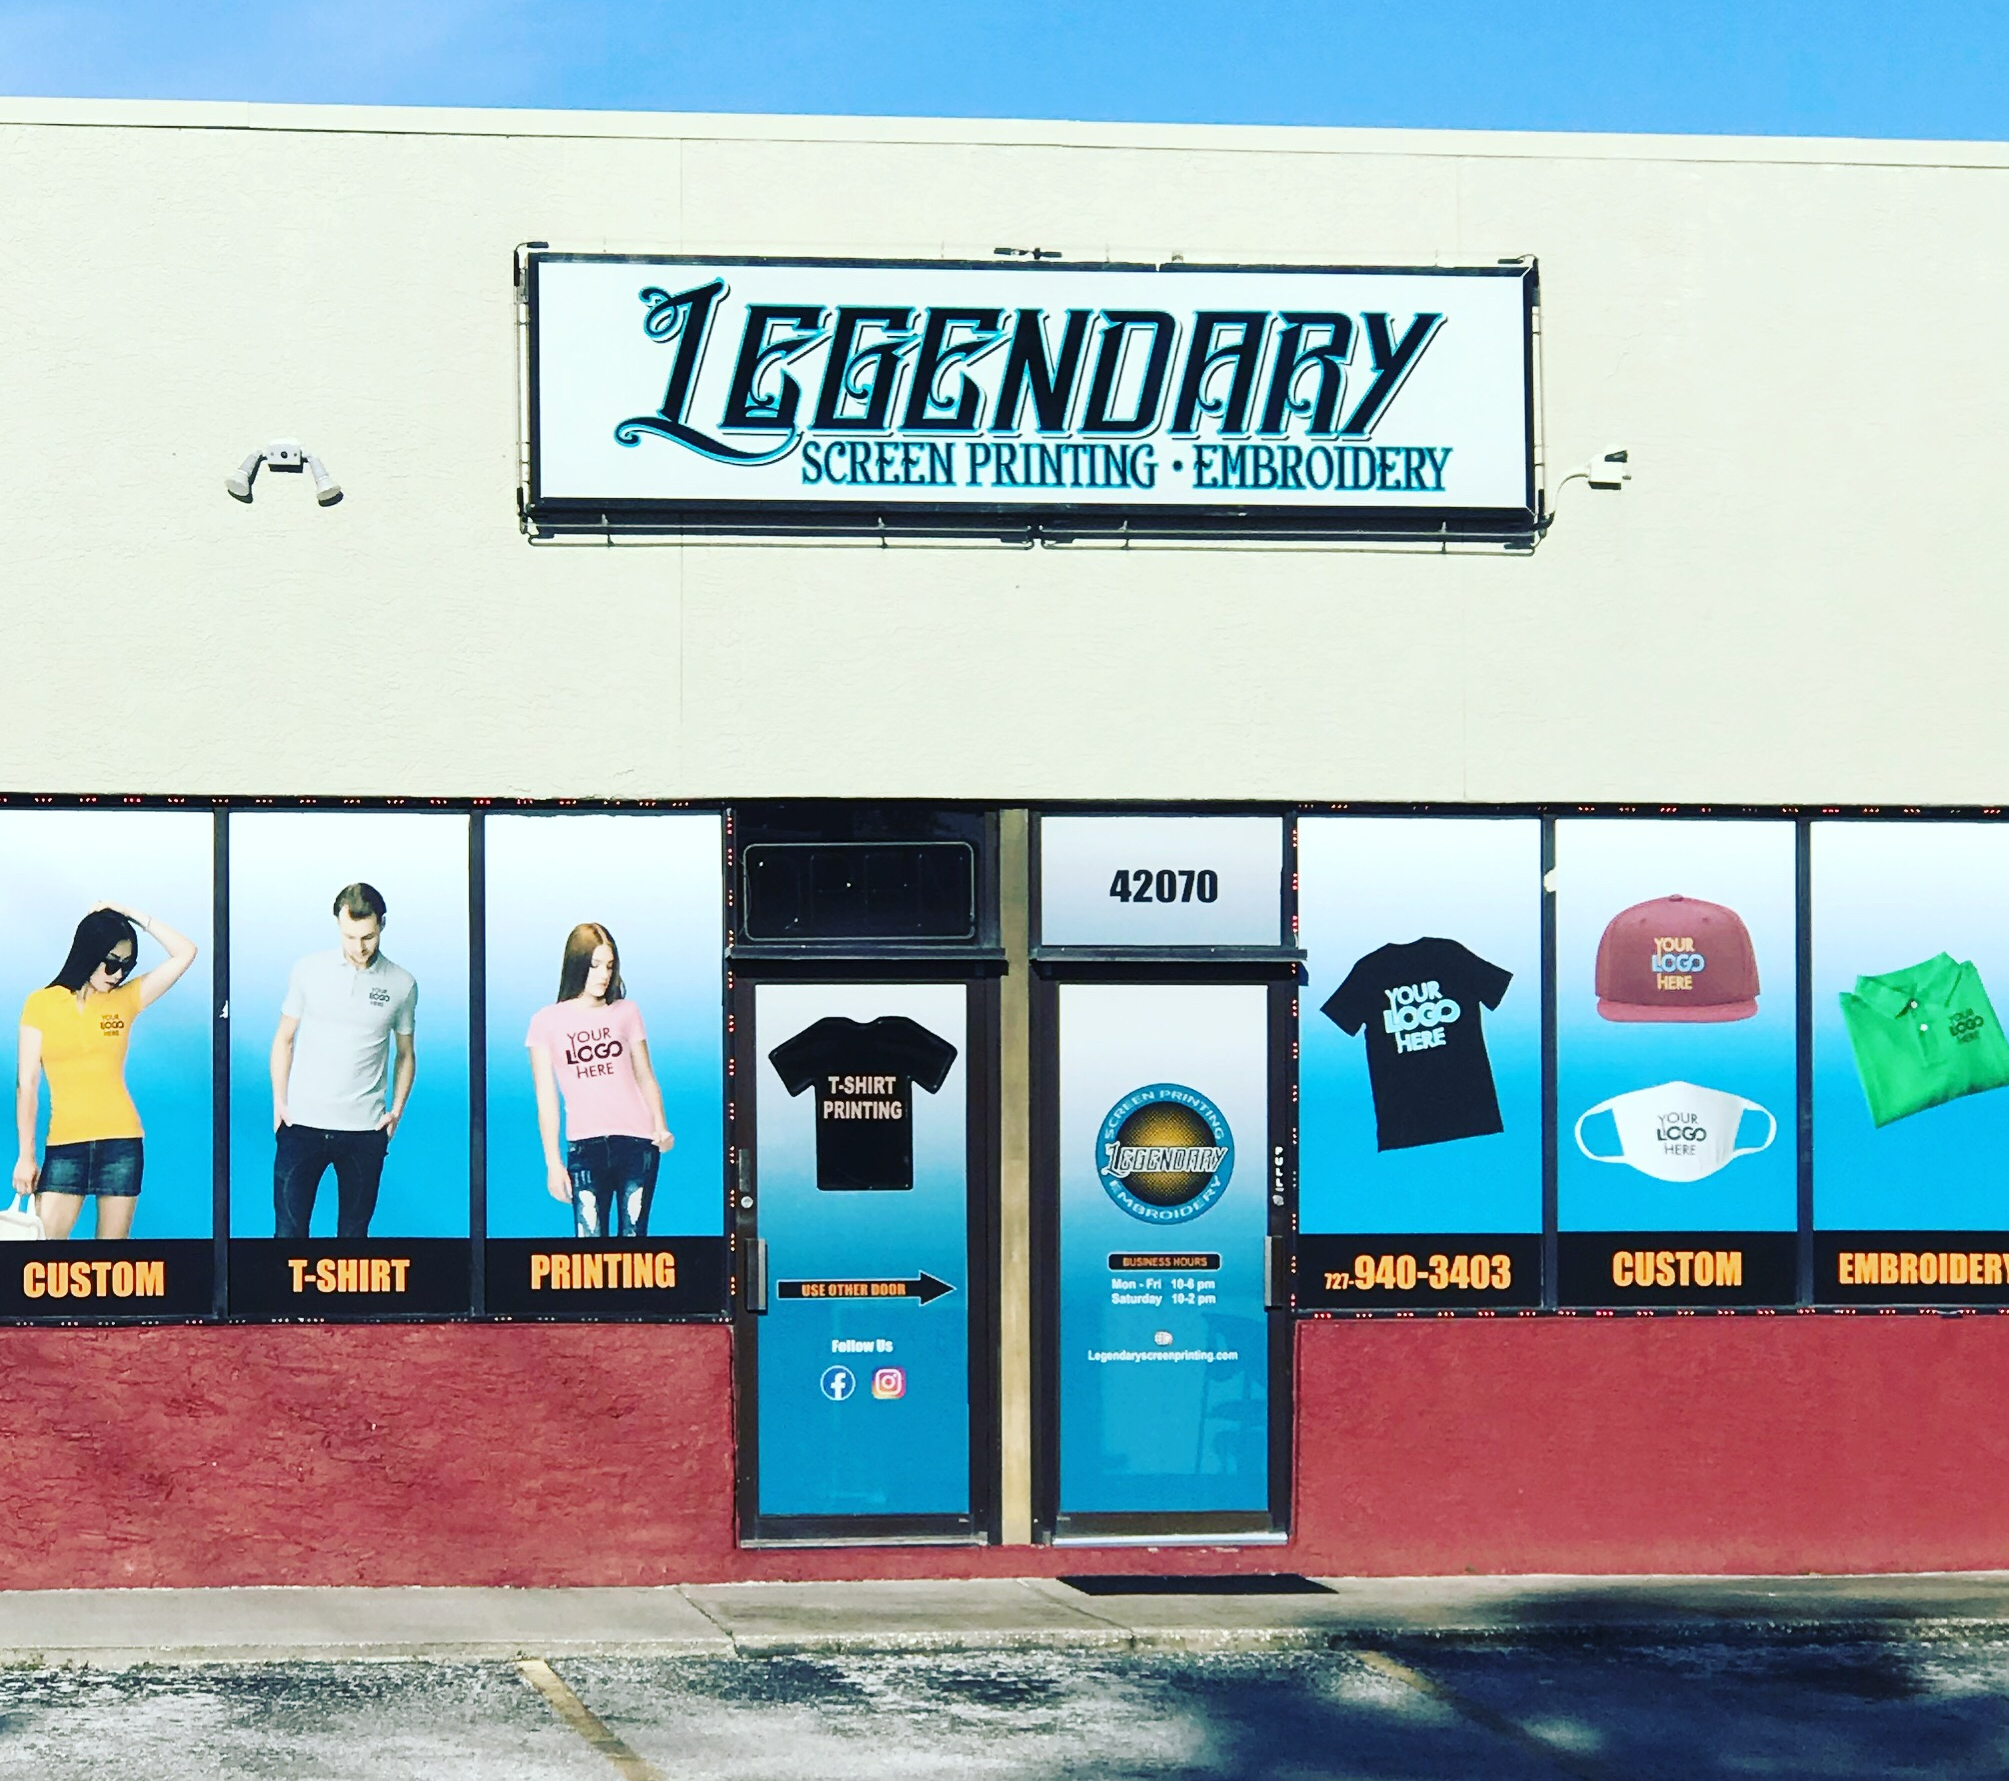 Legendary Screen Printing and Embroidery Headquarters